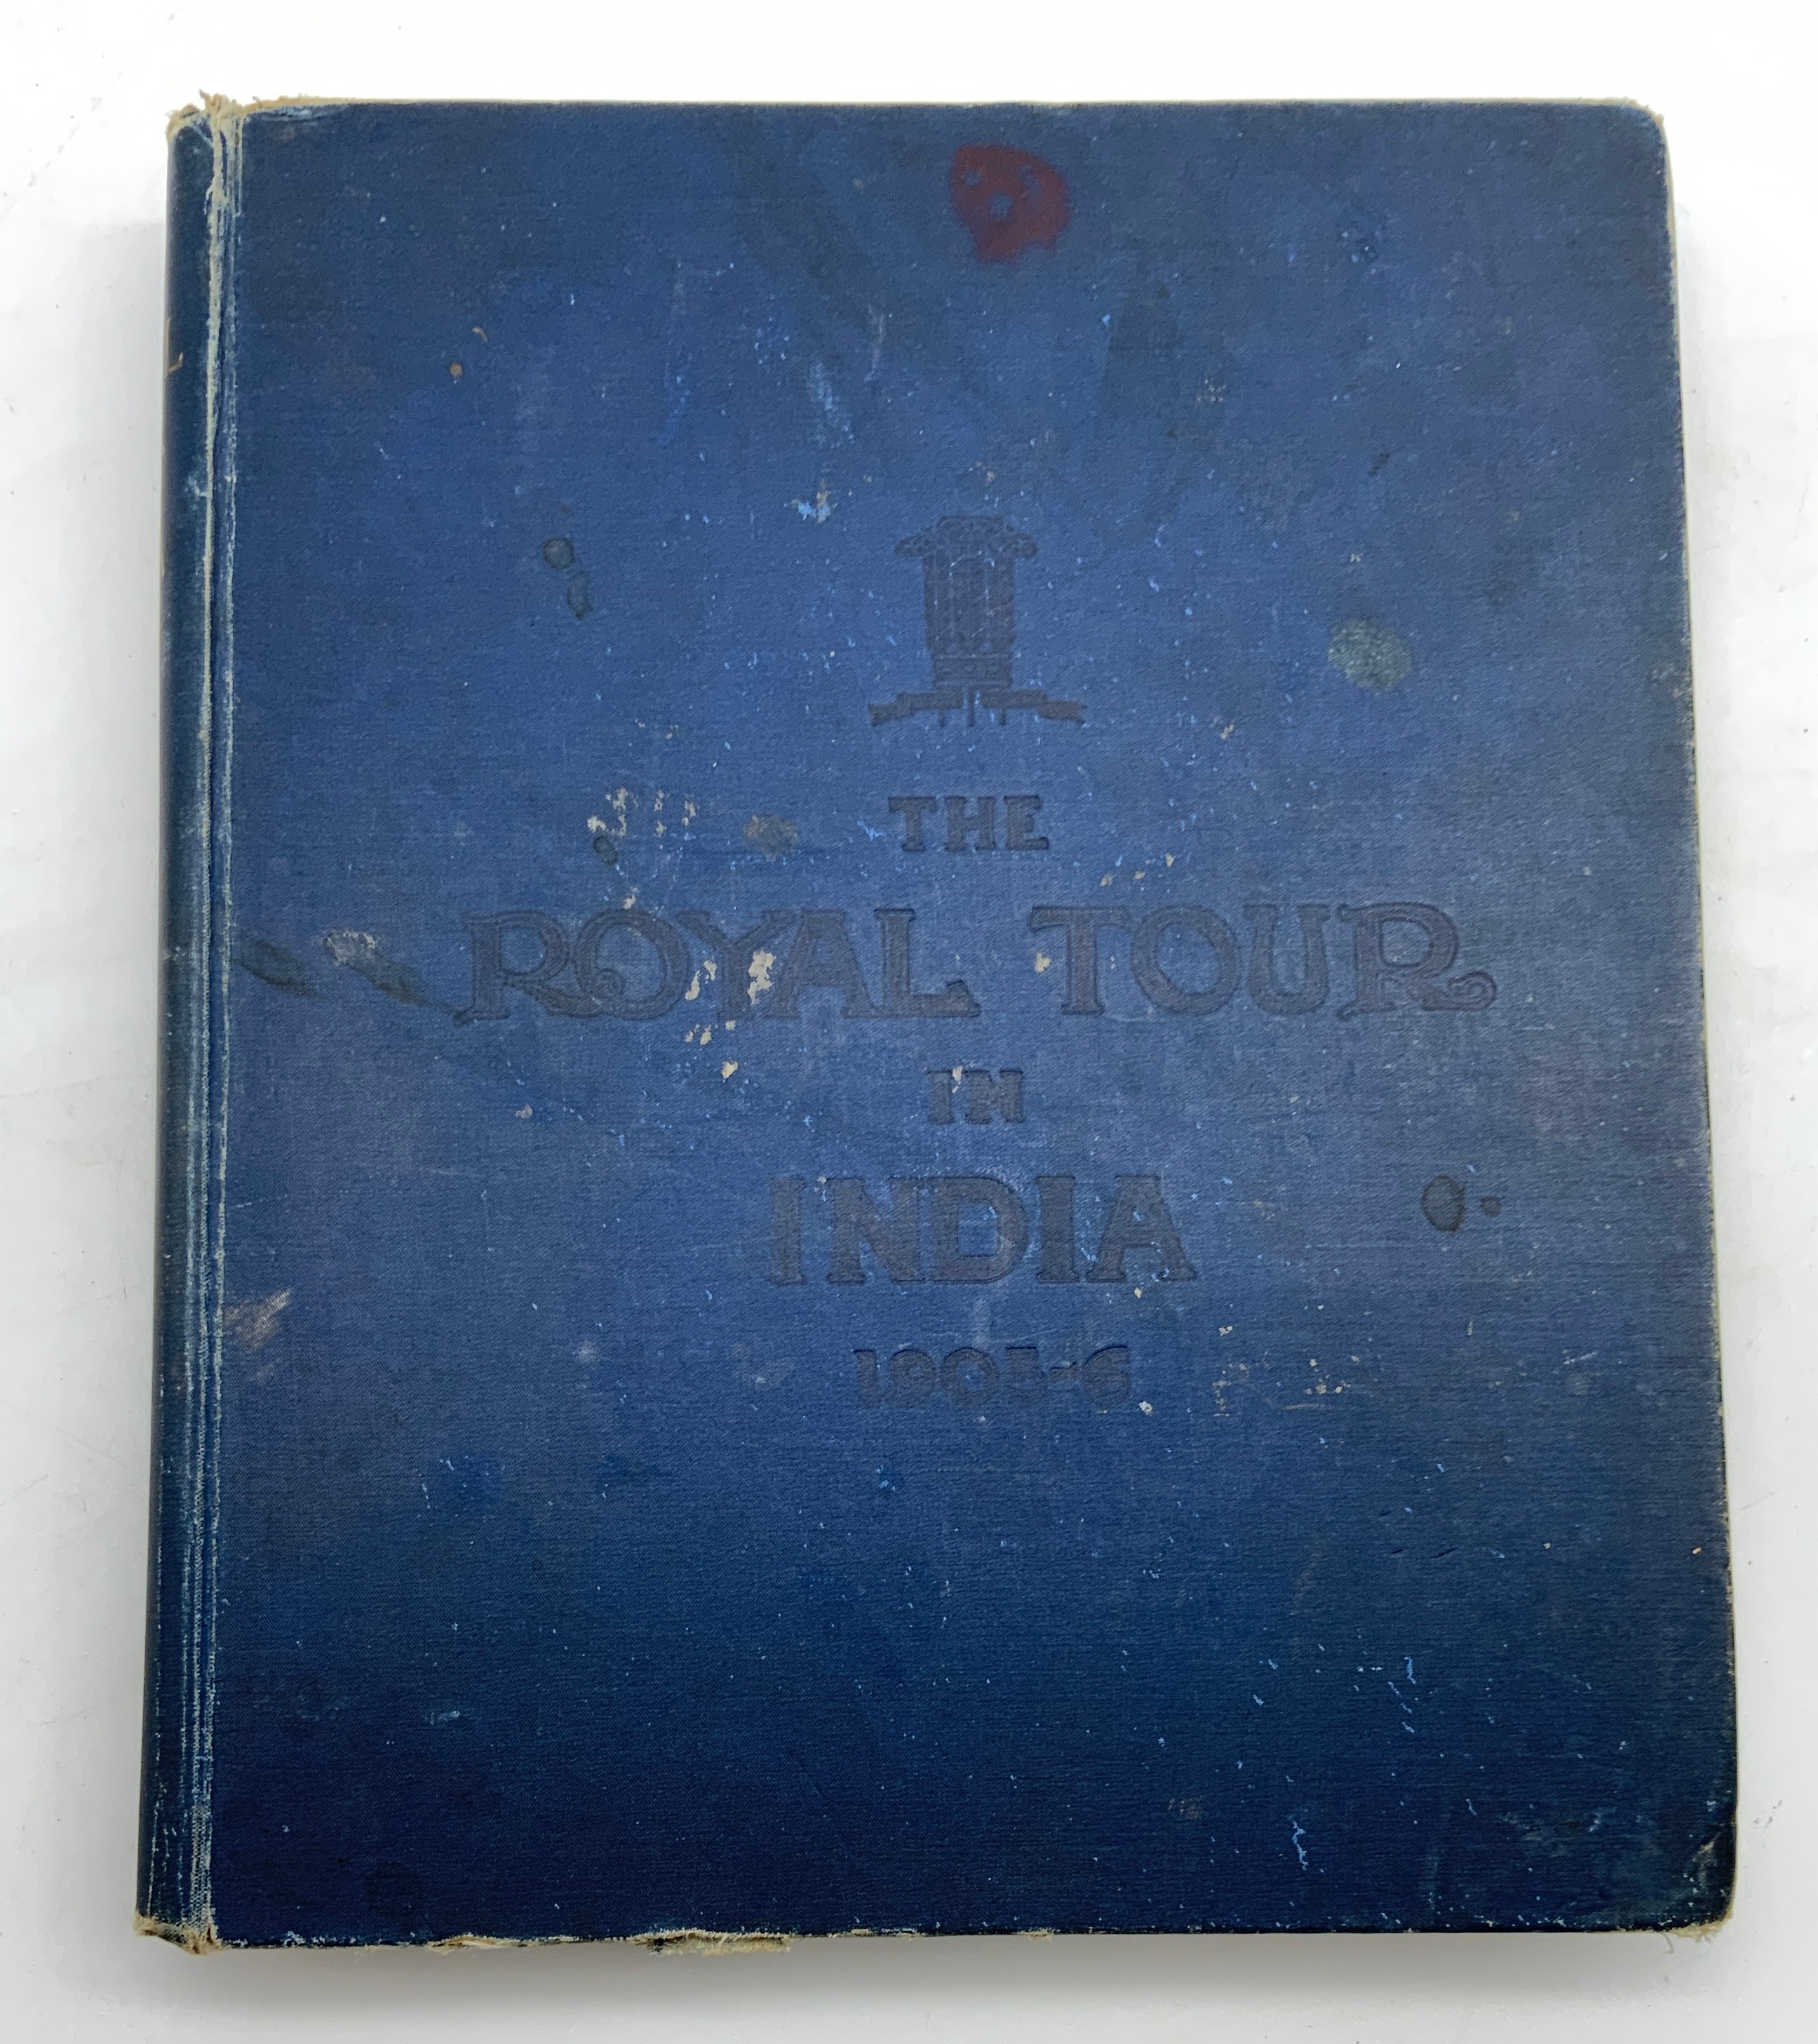 THE ROYAL TOUR TO INDIA BY STANLEY REED A/F